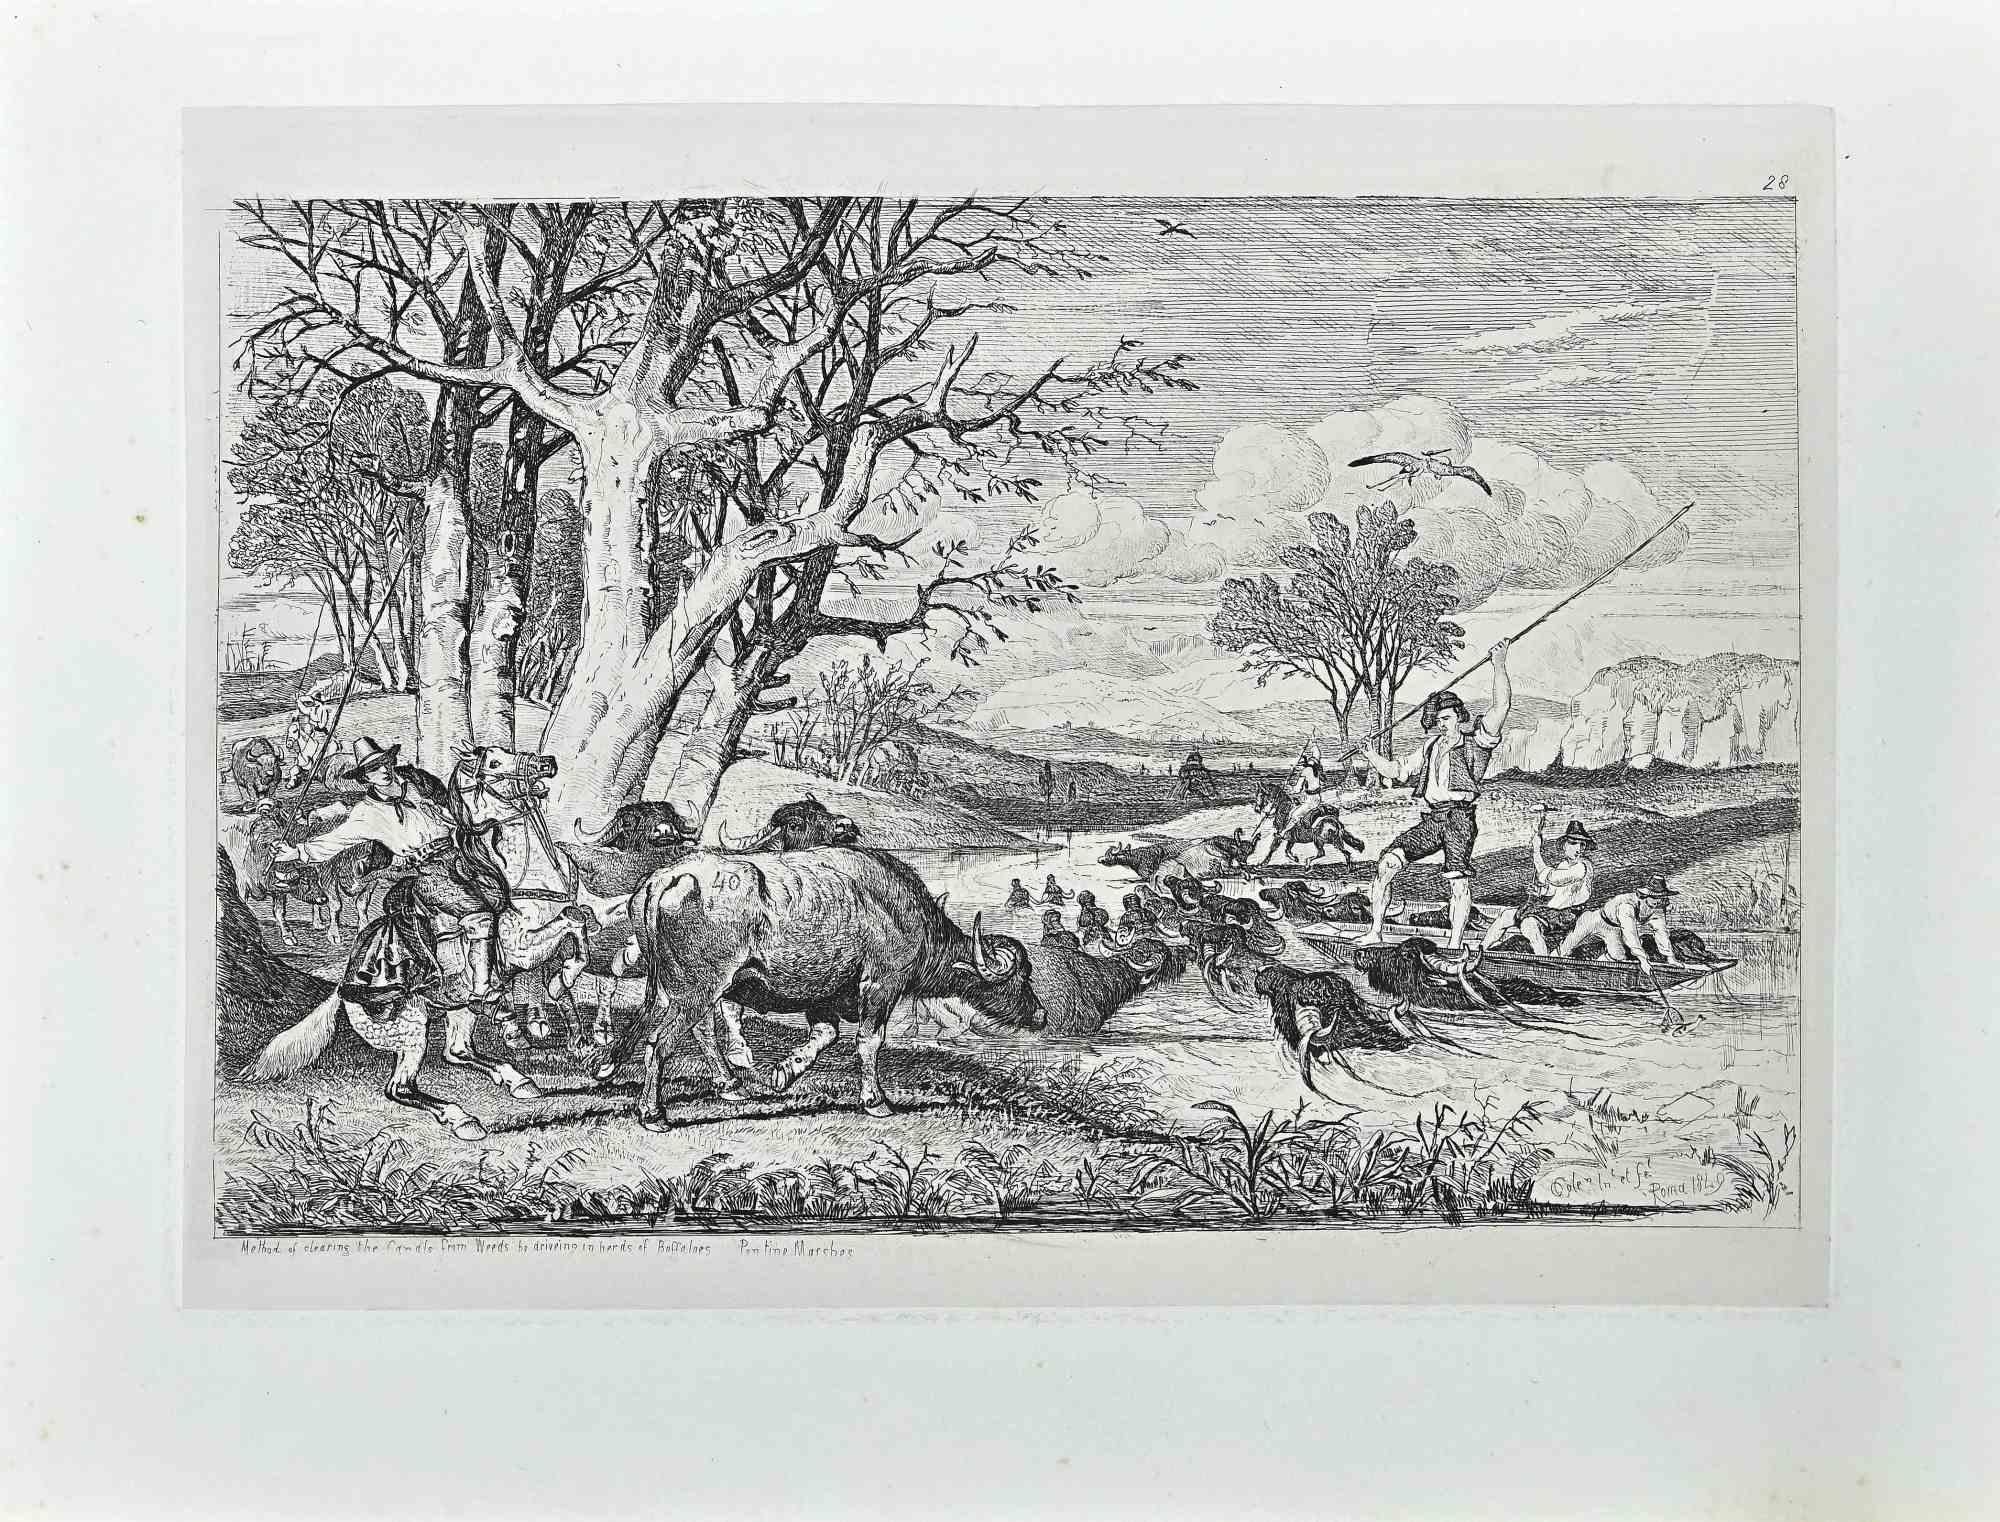 Herd of Buffaloes is an etching on paper realized by Carlo (Charles) Coleman in 1849 in Rome, Italy.

Signed on the plate and dated on the lower right and titled on the lower left.

Good conditions.

The artwork is created through deft strokes by